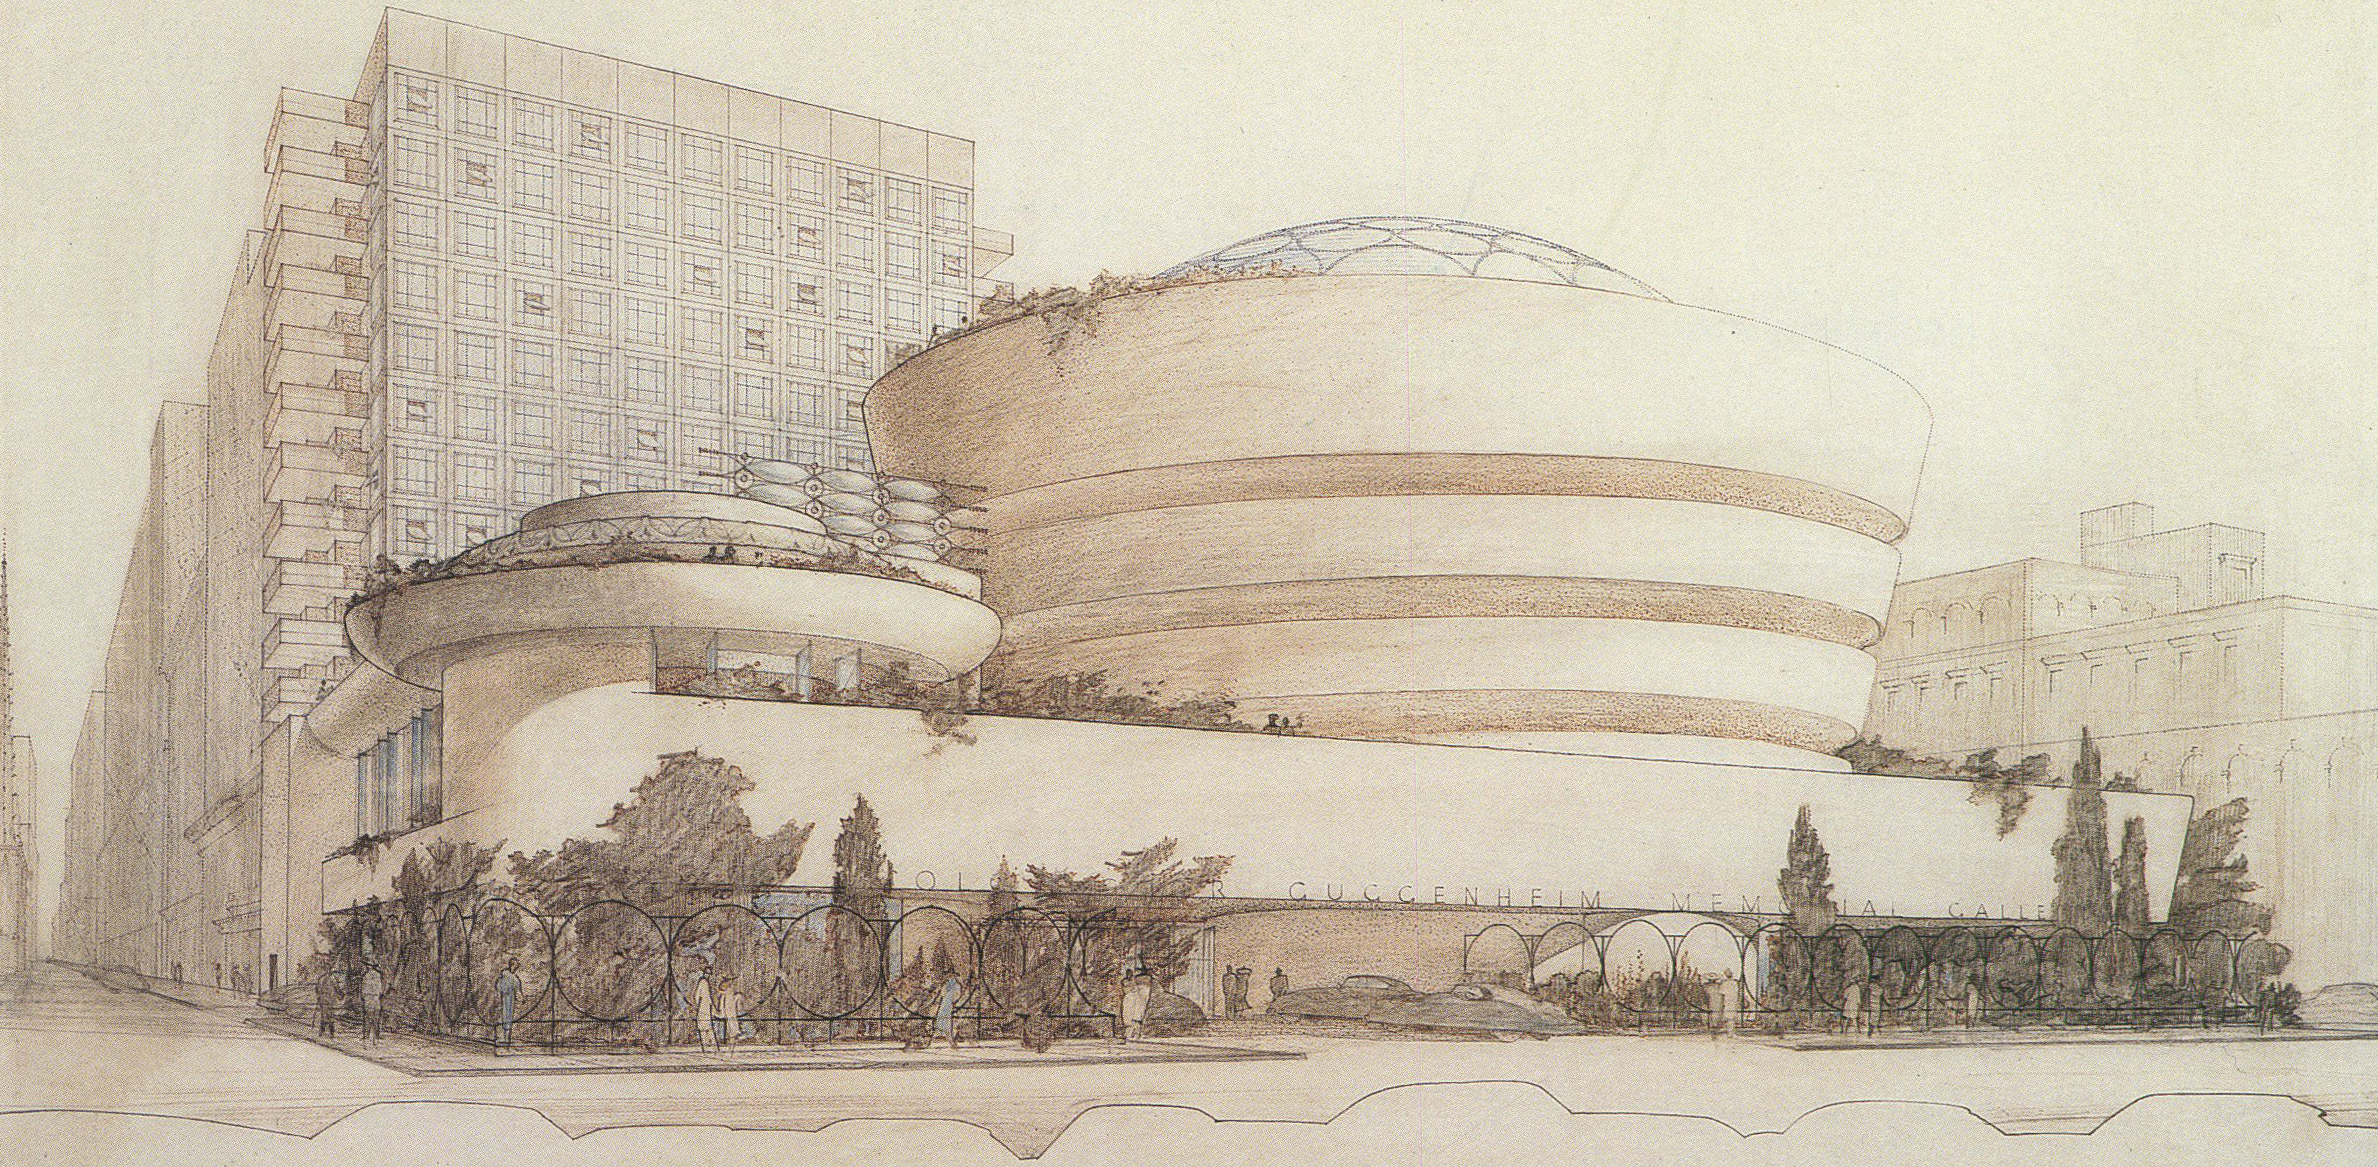 100 Architectural Sketches  ArchDaily